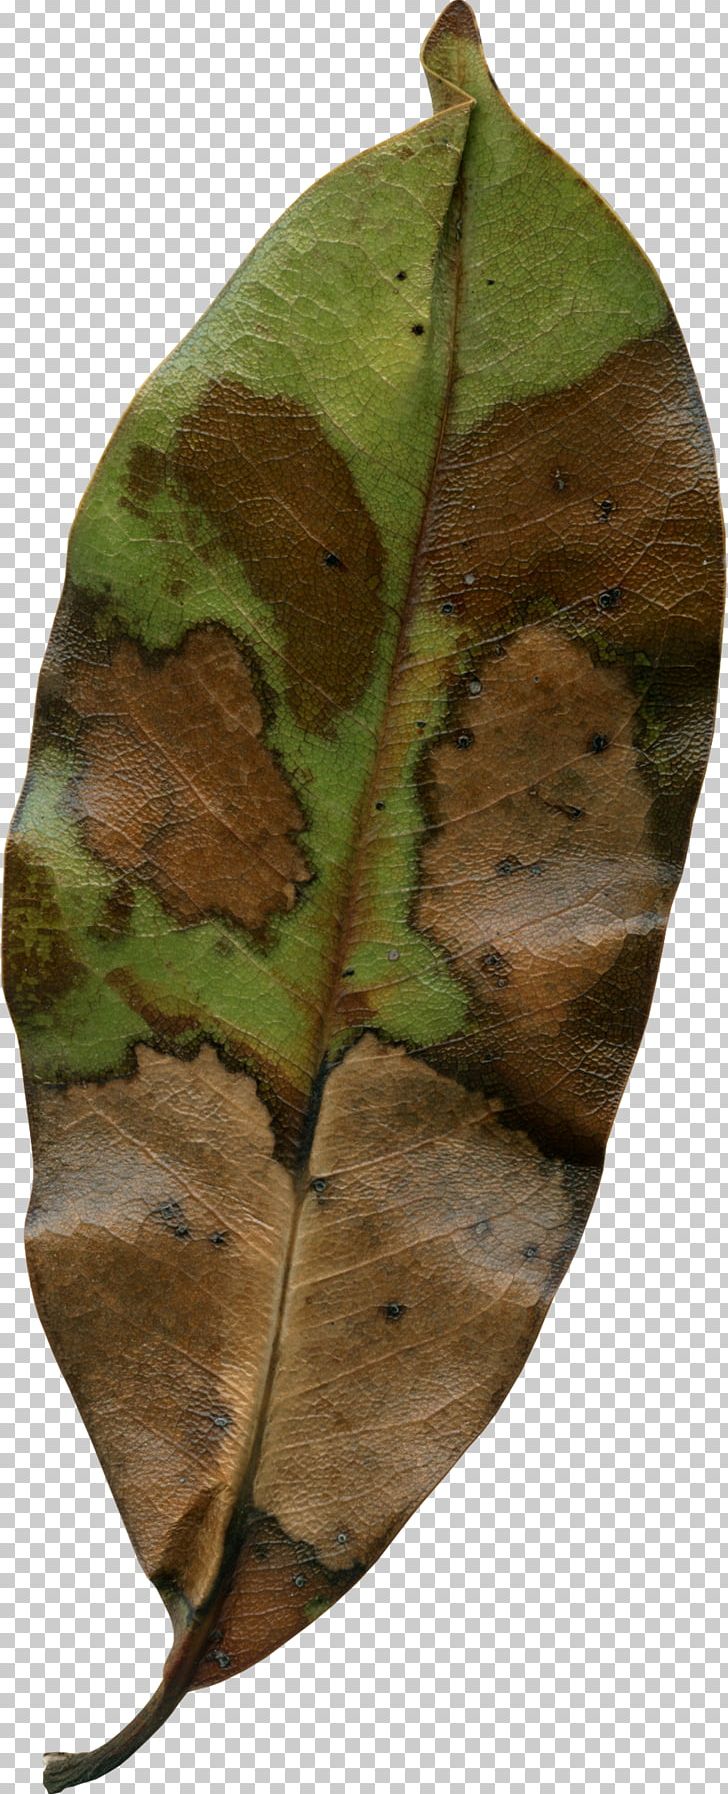 Autumn Leaf Photography PNG, Clipart, Autumn, Autumn Leaves, Dead Leaves, Download, Leaf Free PNG Download